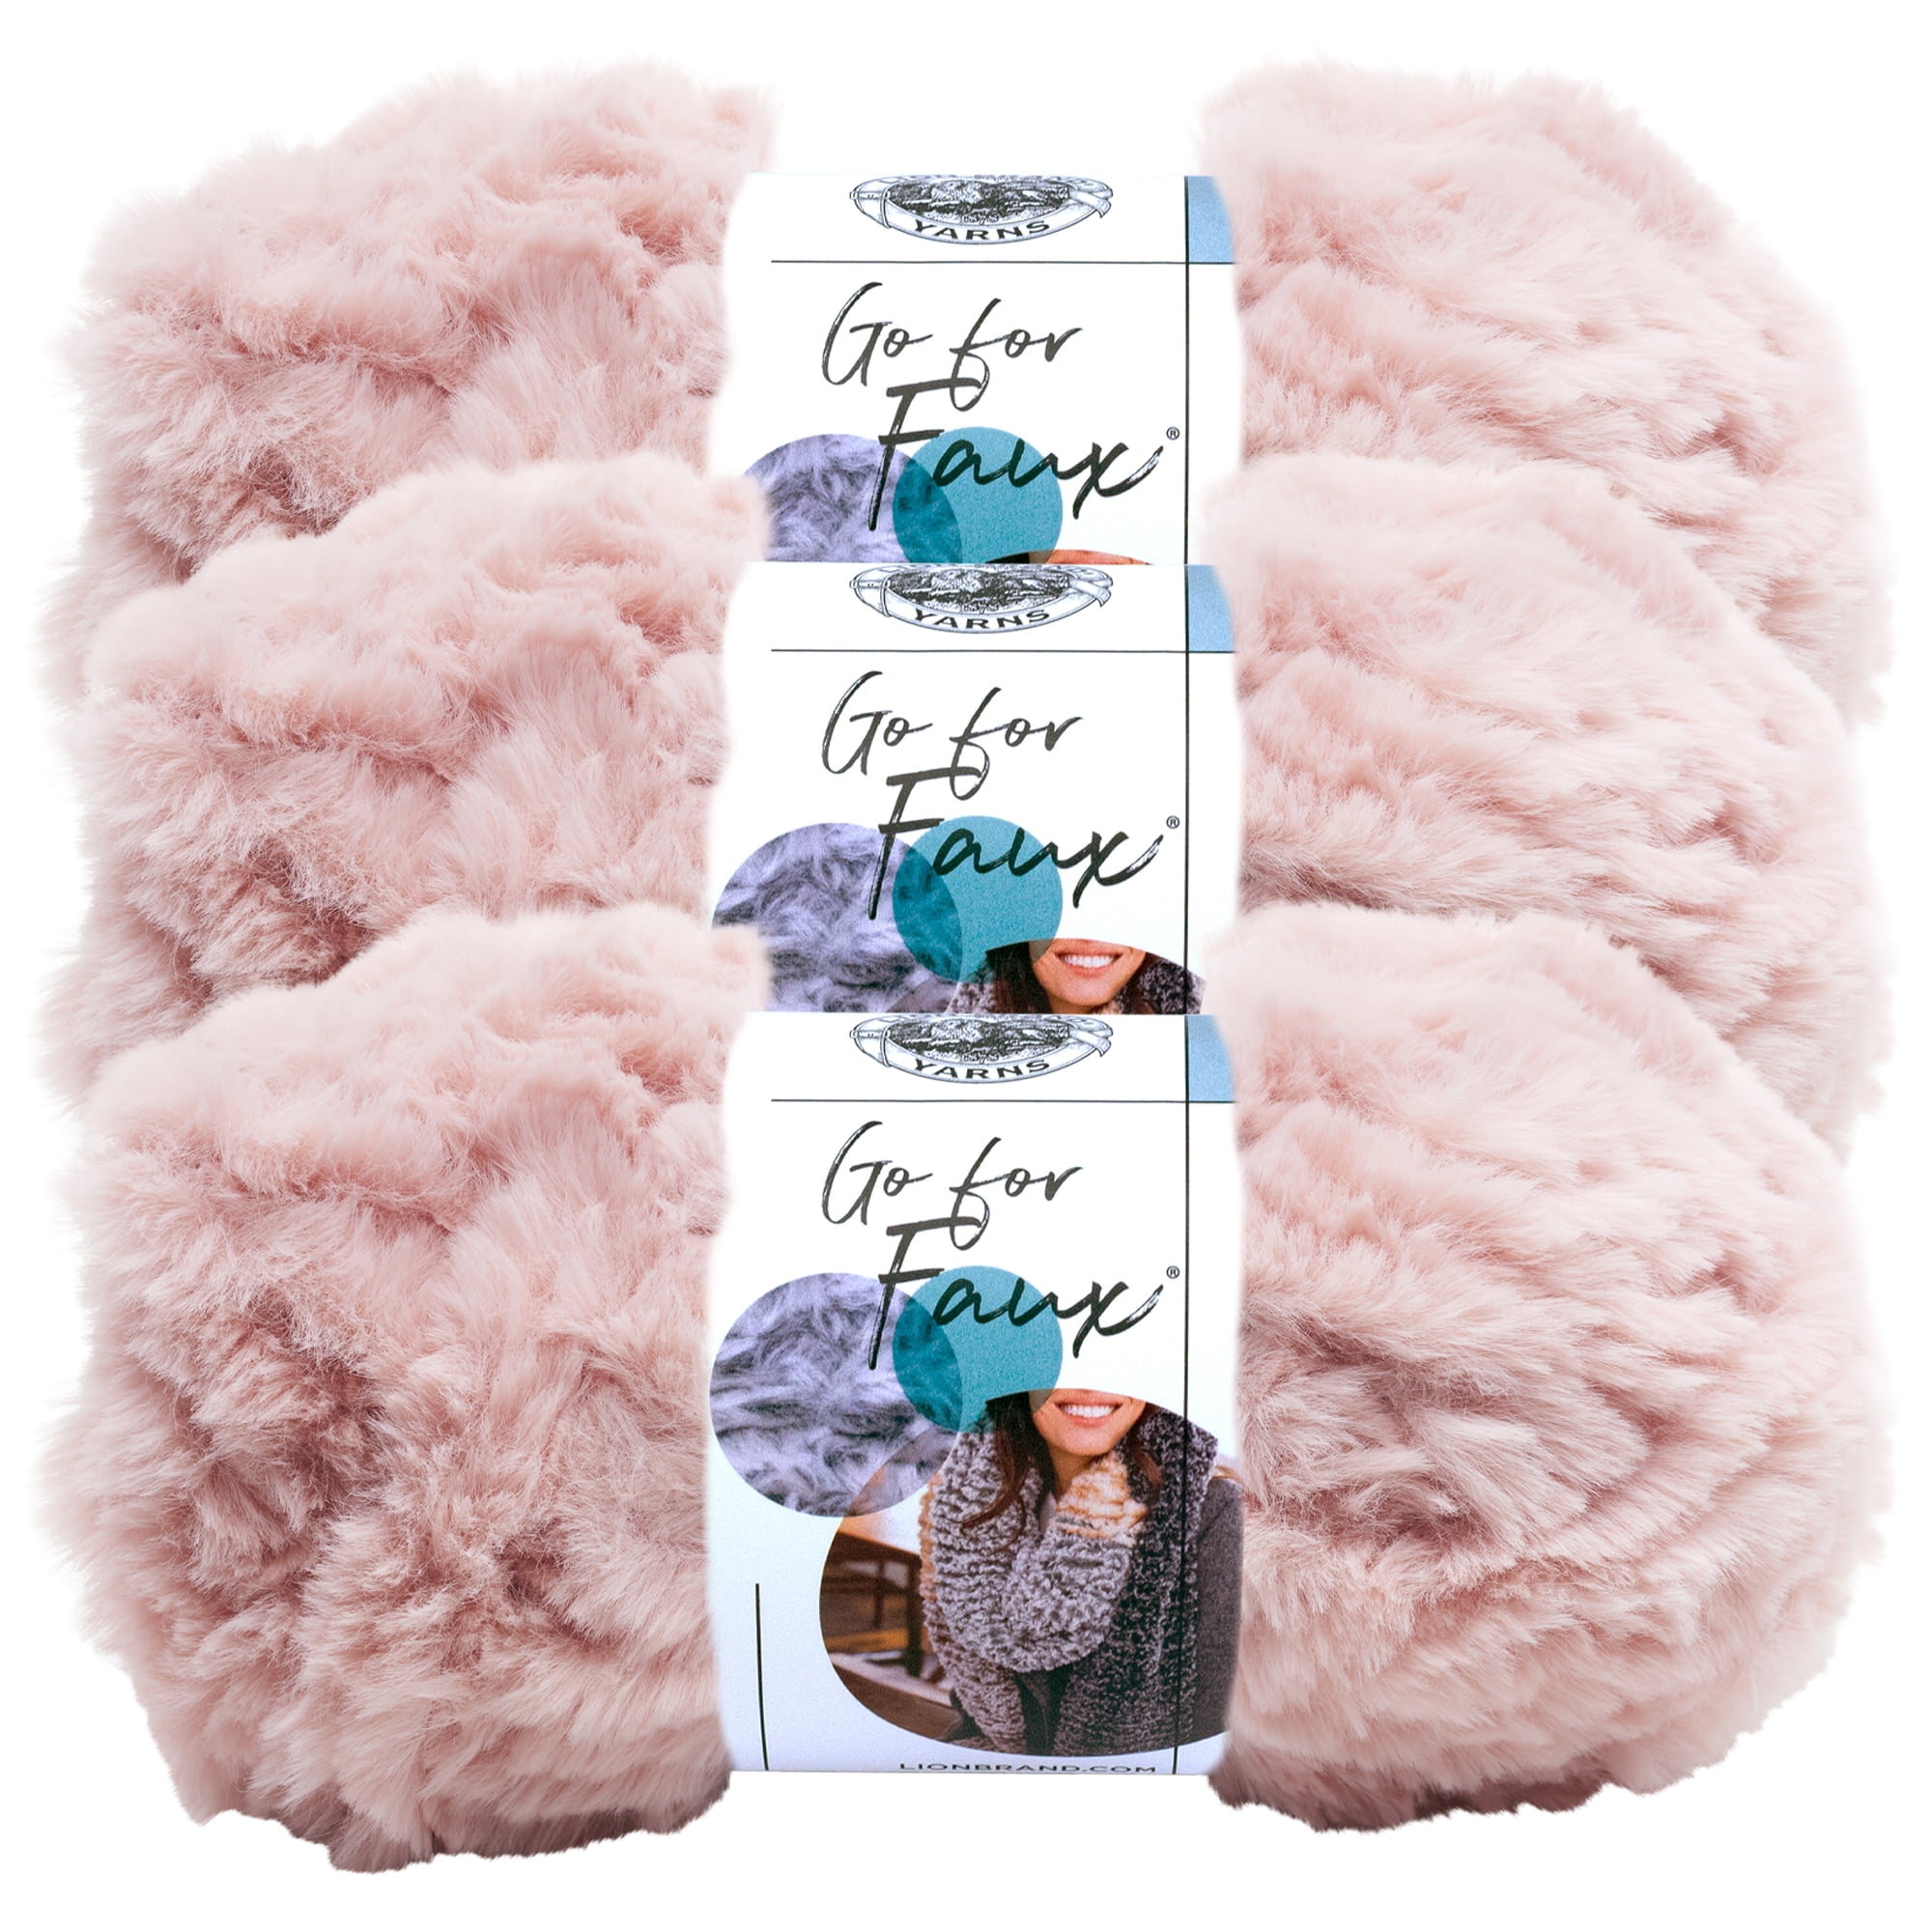 Lion Brand Go For Faux Yarn-Meow Pink